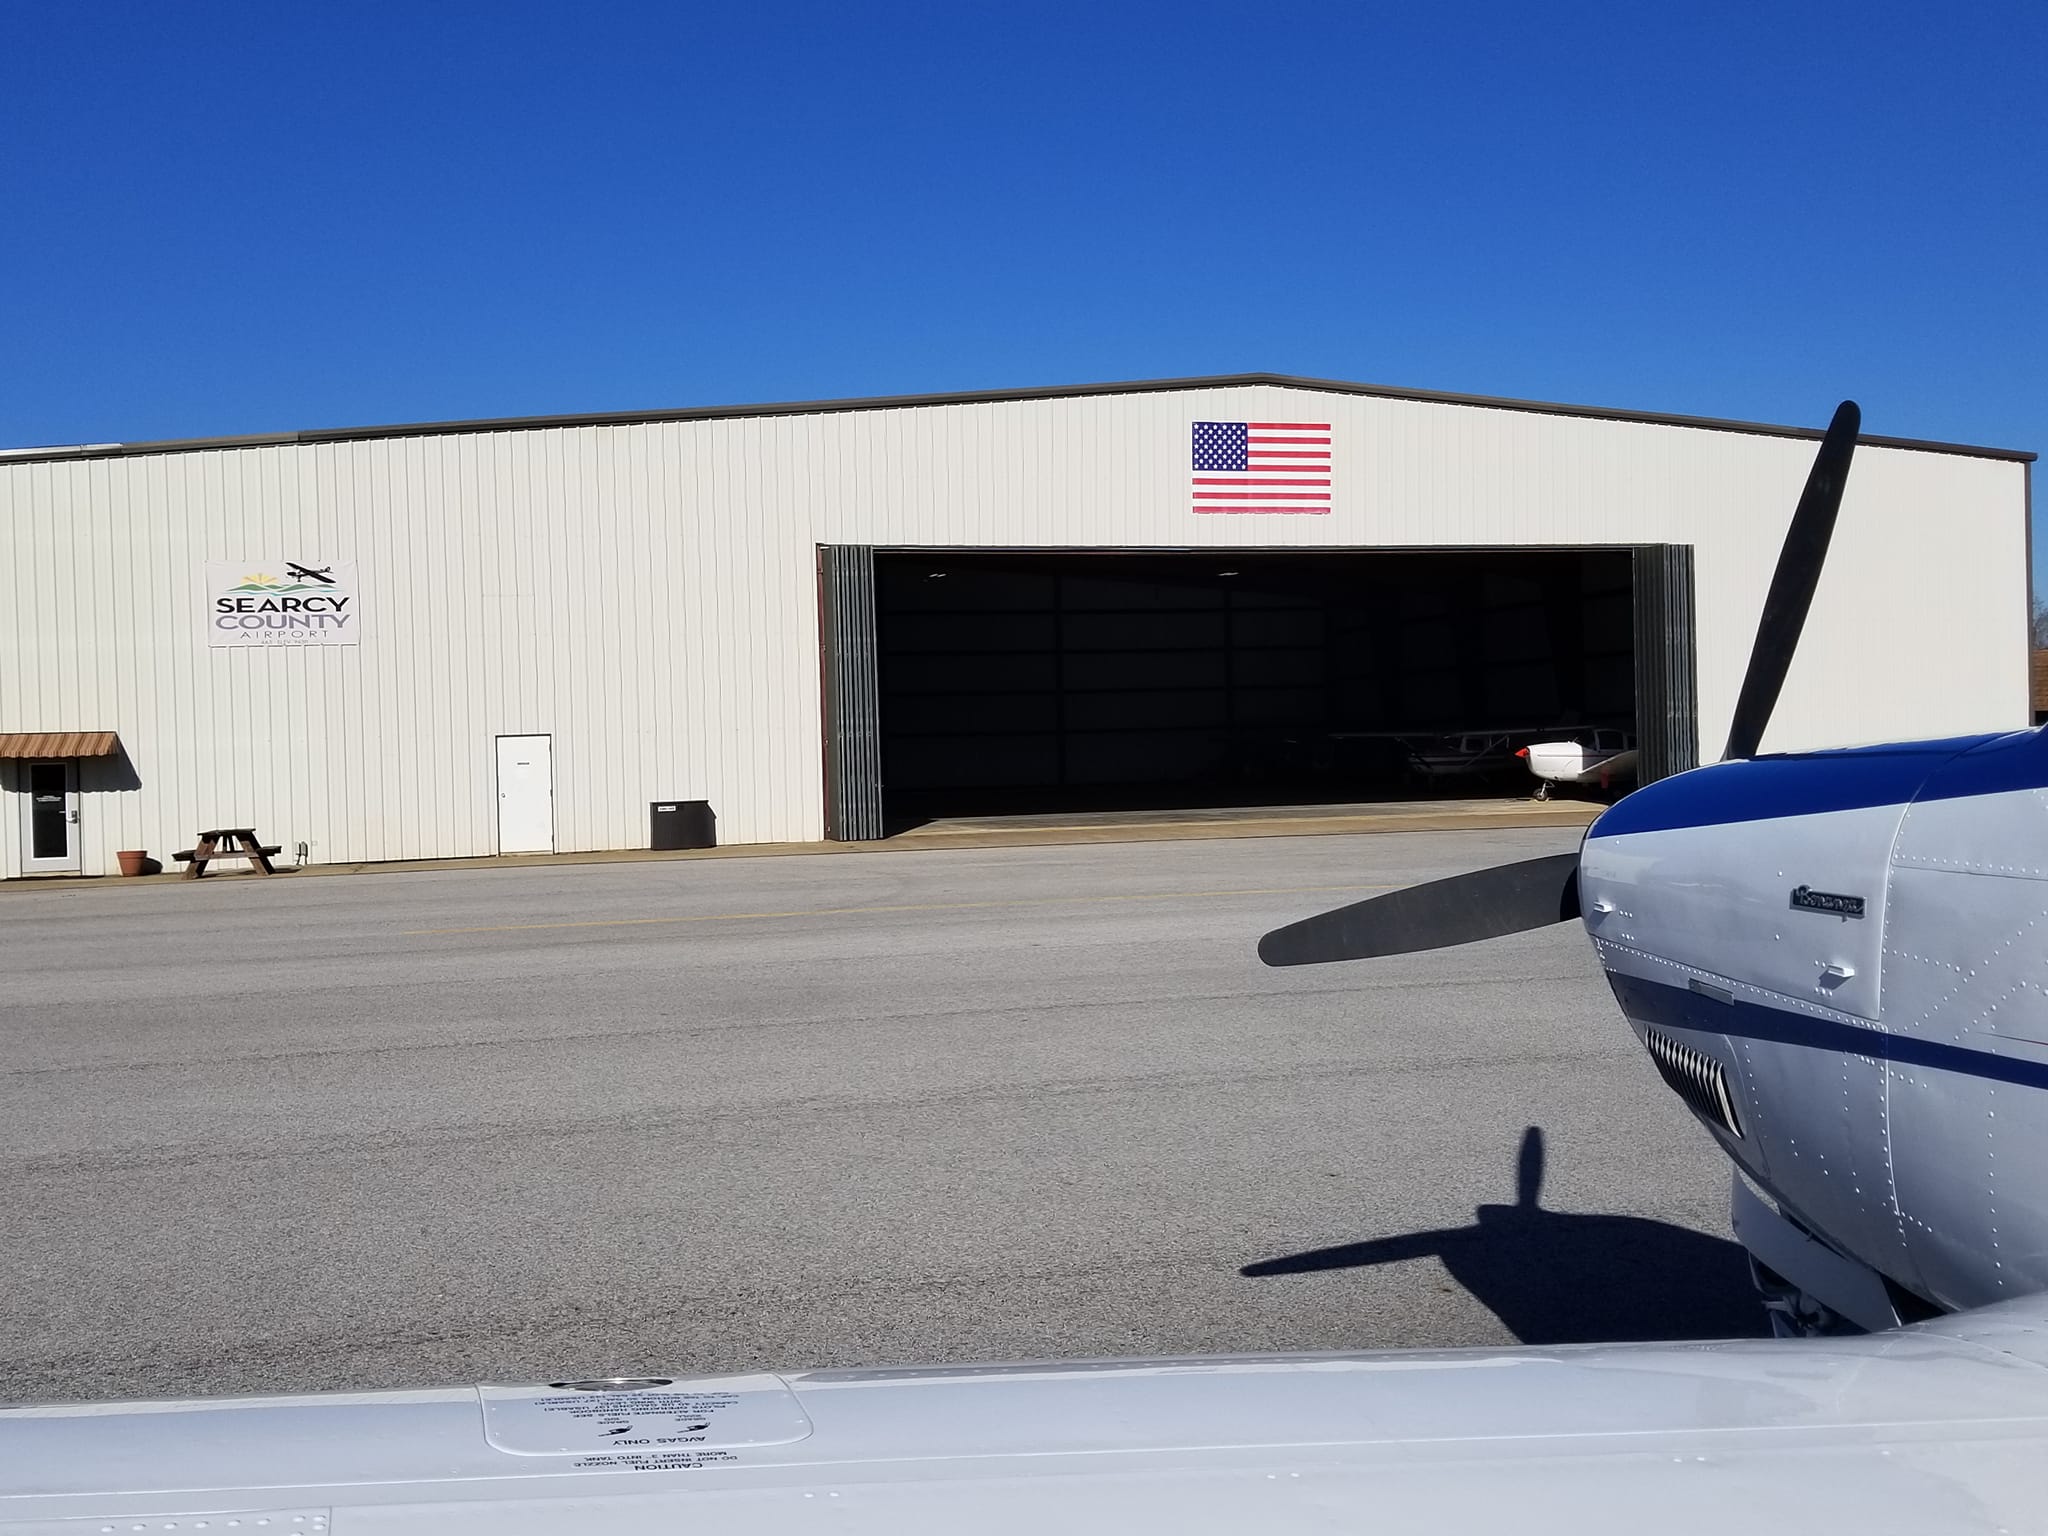 Searcy County Marshall, AR Airport 4A5